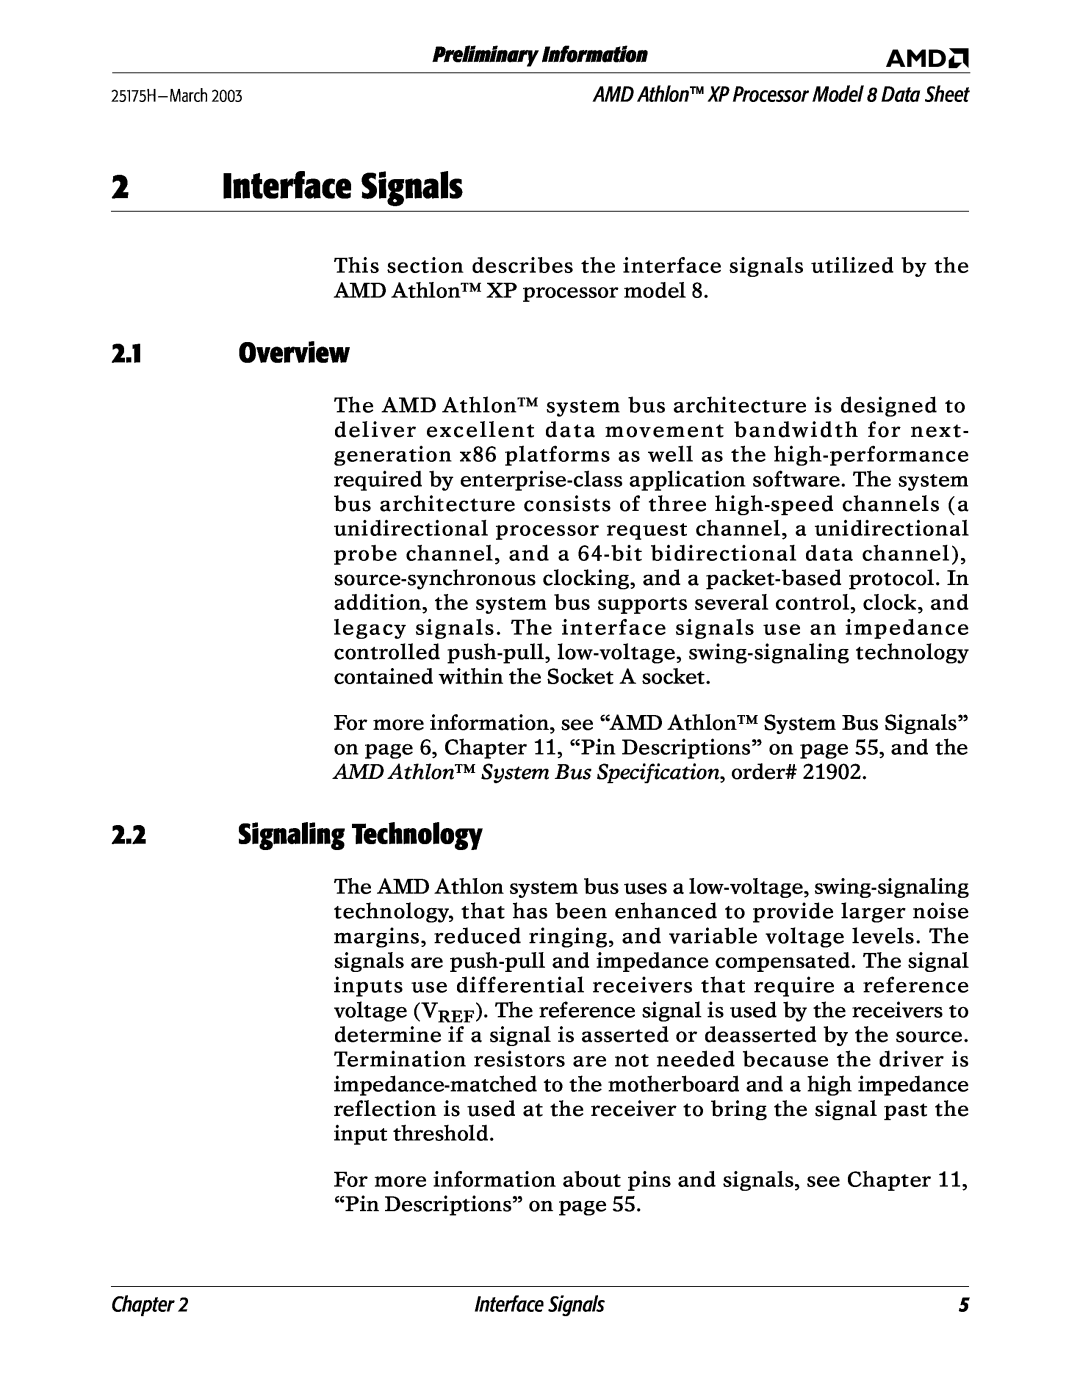 AMD 8 manual Interface Signals, Overview, Signaling Technology, Preliminary Information, Chapter 